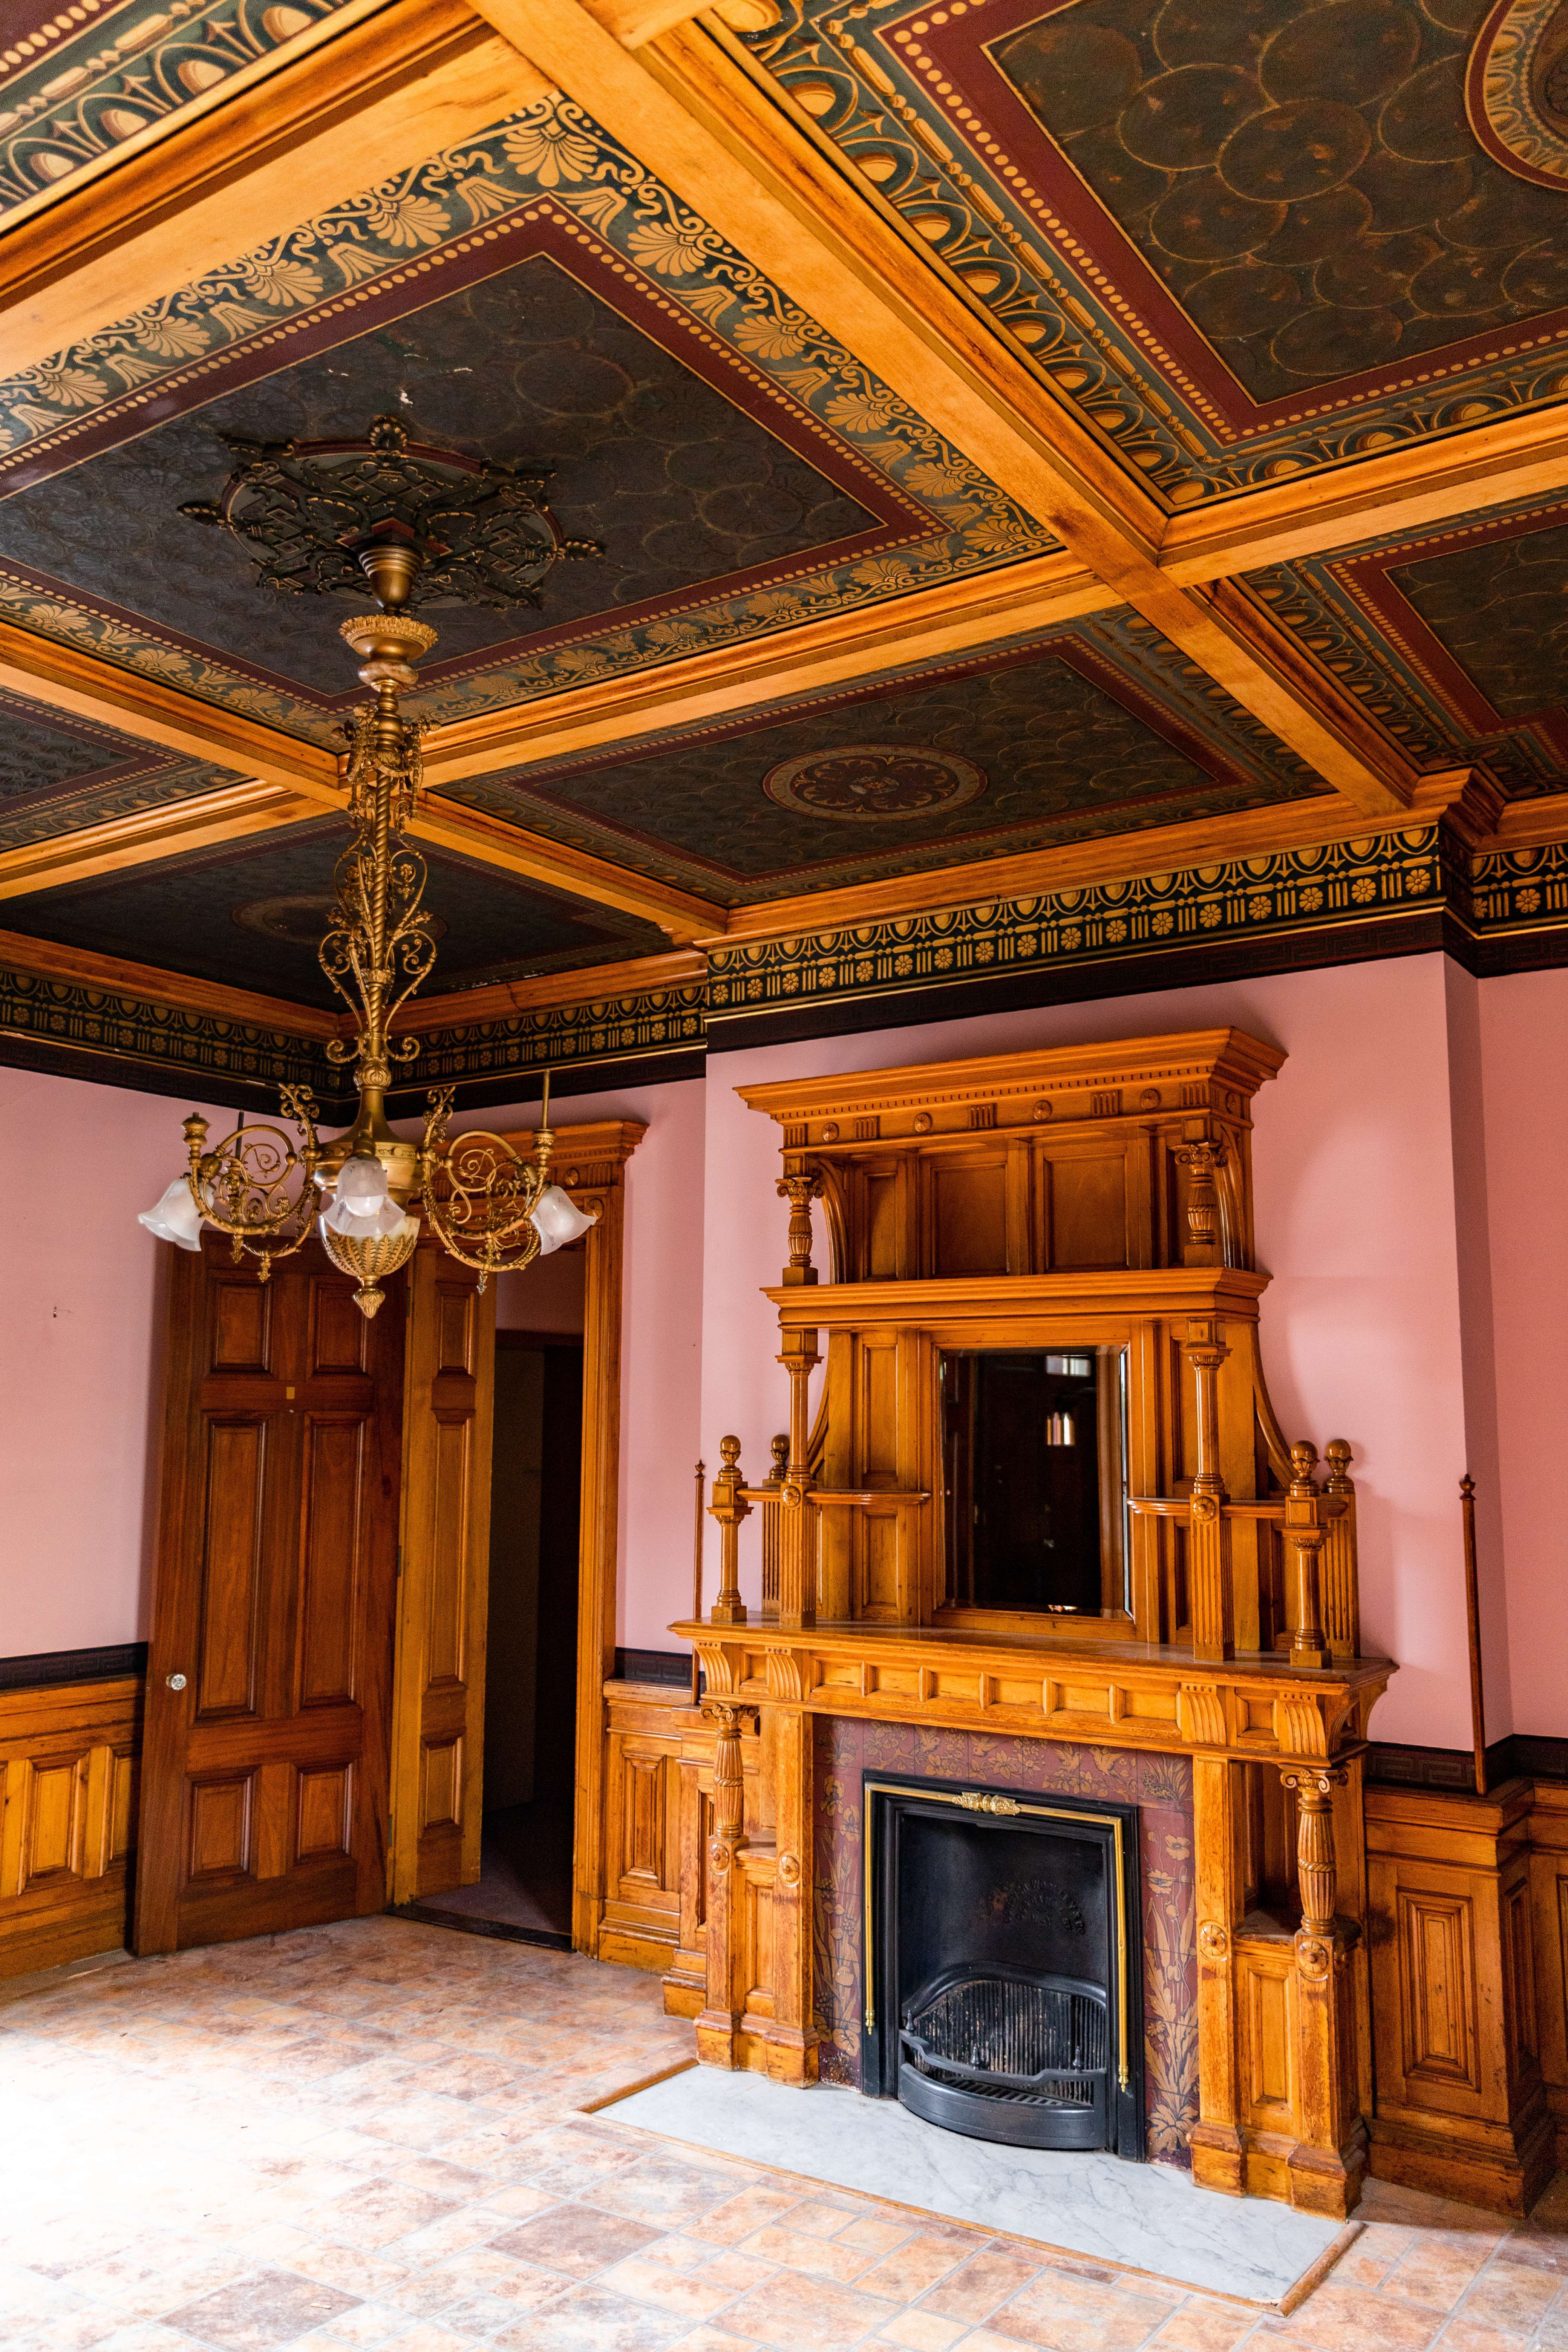 ornate ceiling and fireplace